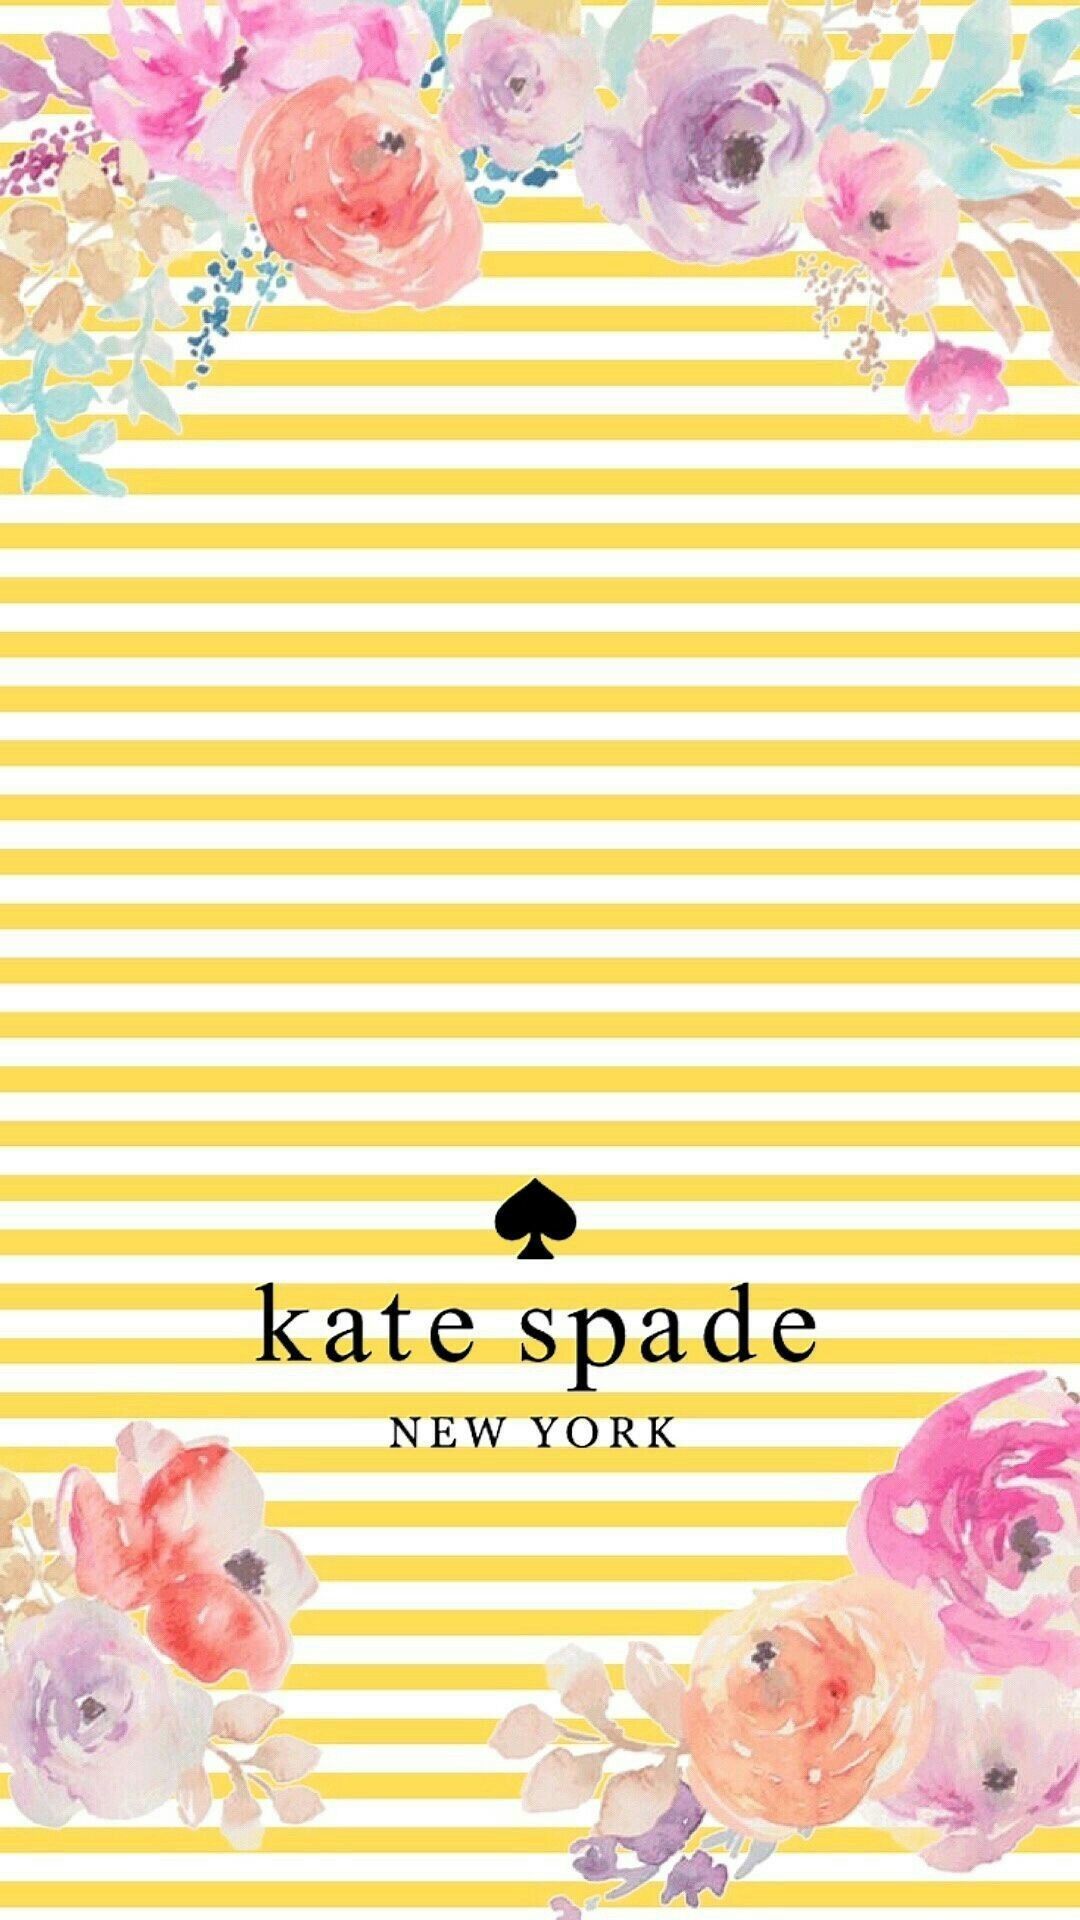 Download Add a Touch of Feminine Chic to Your Desktop with Kate Spade  Wallpaper  Wallpaperscom